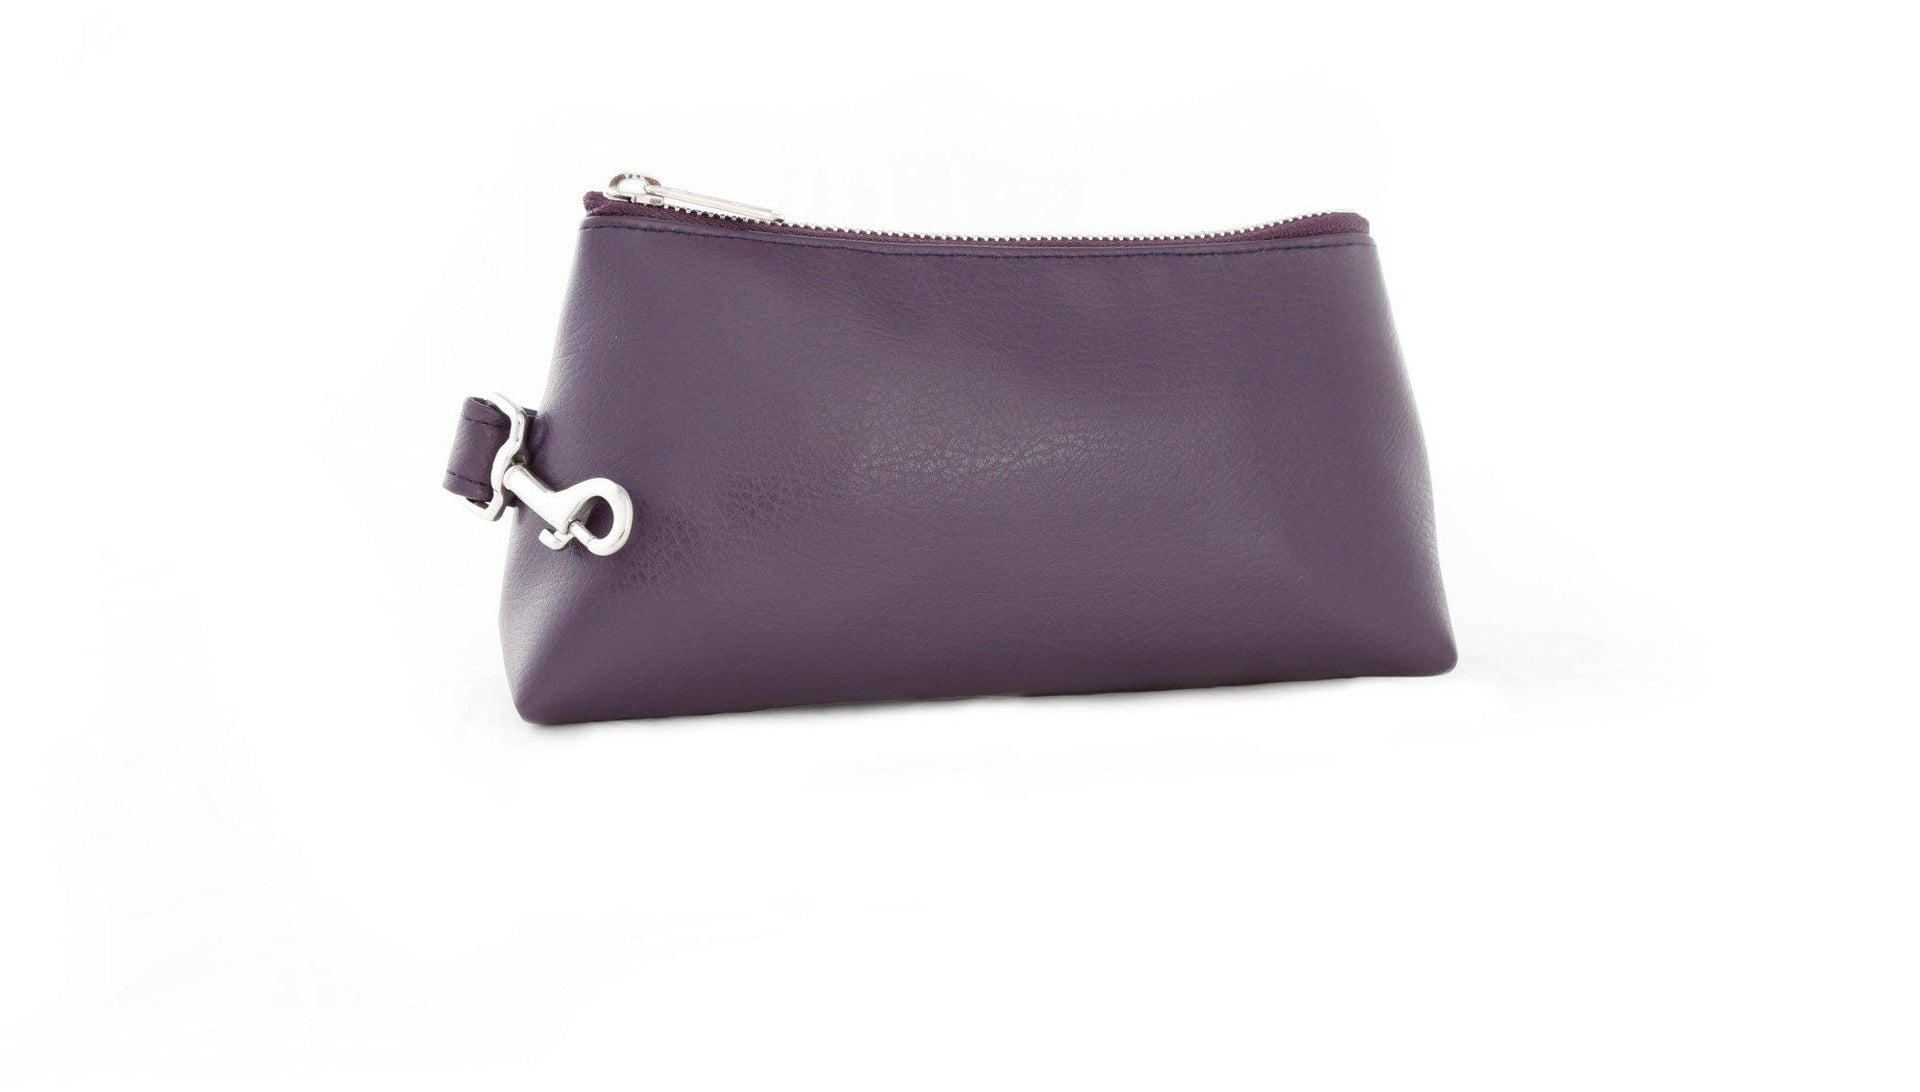 The Signature Bag, Your Clutch Purse Organizer Solution in Vegan, Leather-Like Style and Comfort Mini with Silver Hardware